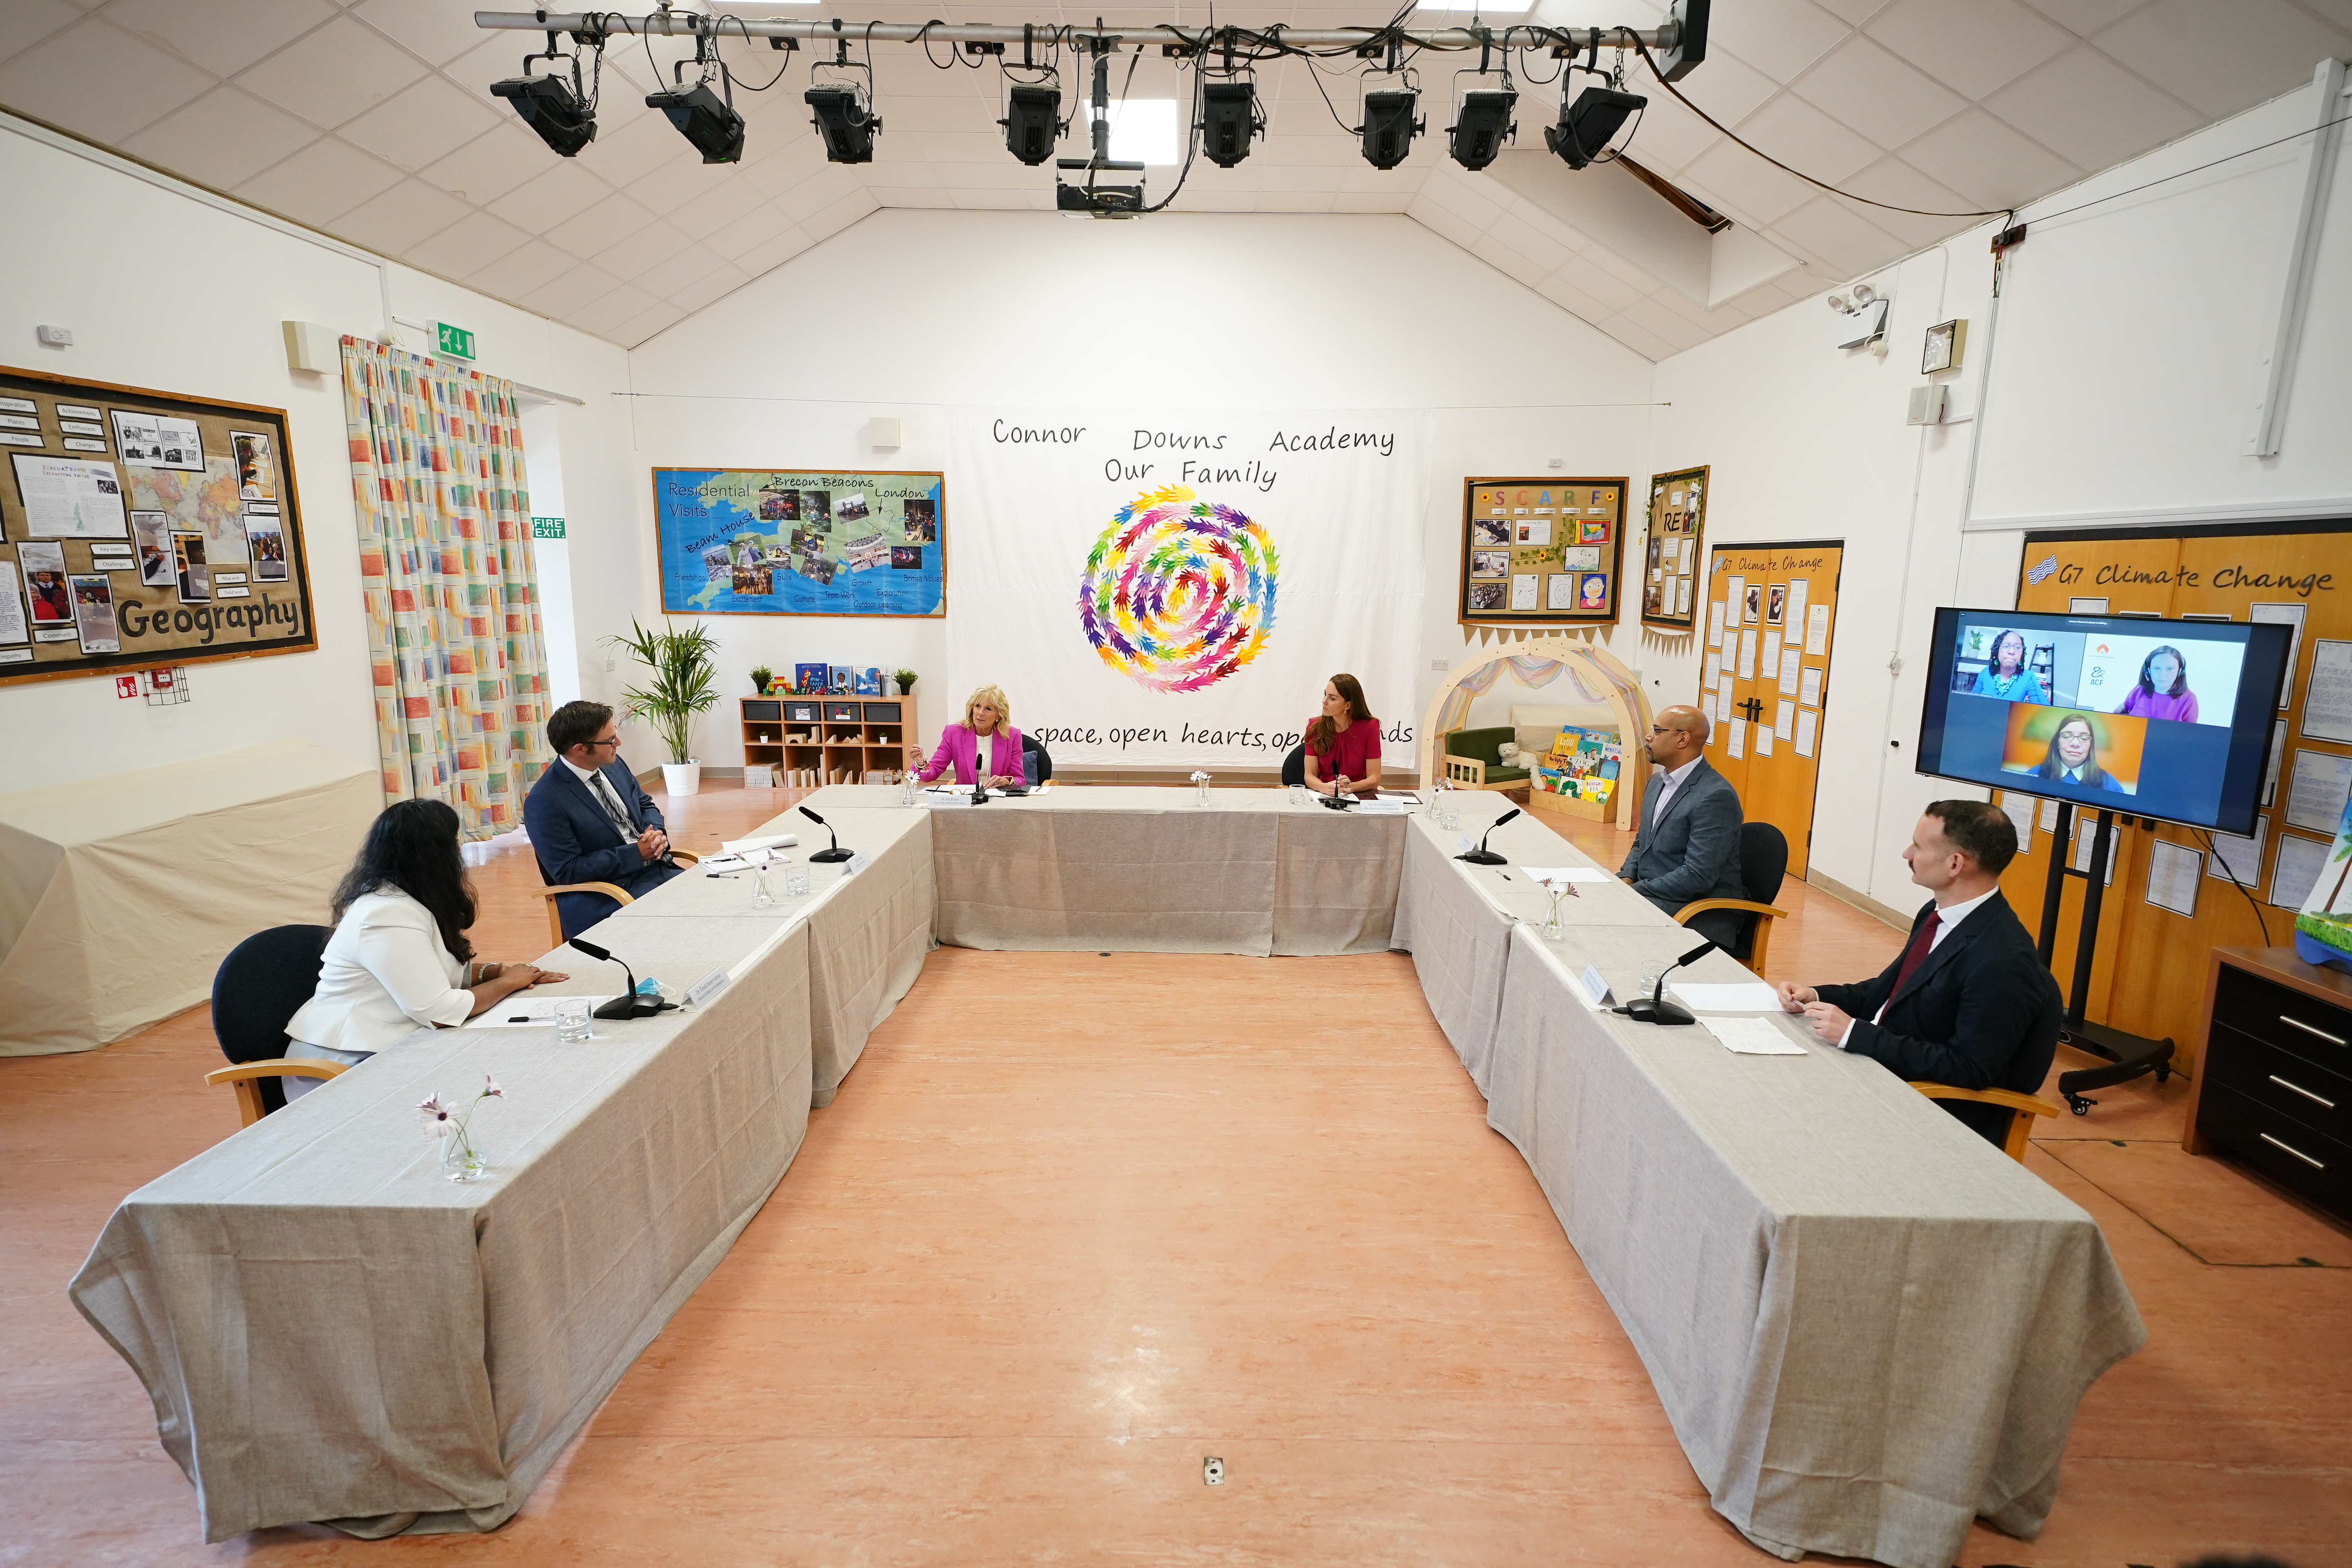 The Duchess of Cambridge and Dr Biden participate in an education round-table.